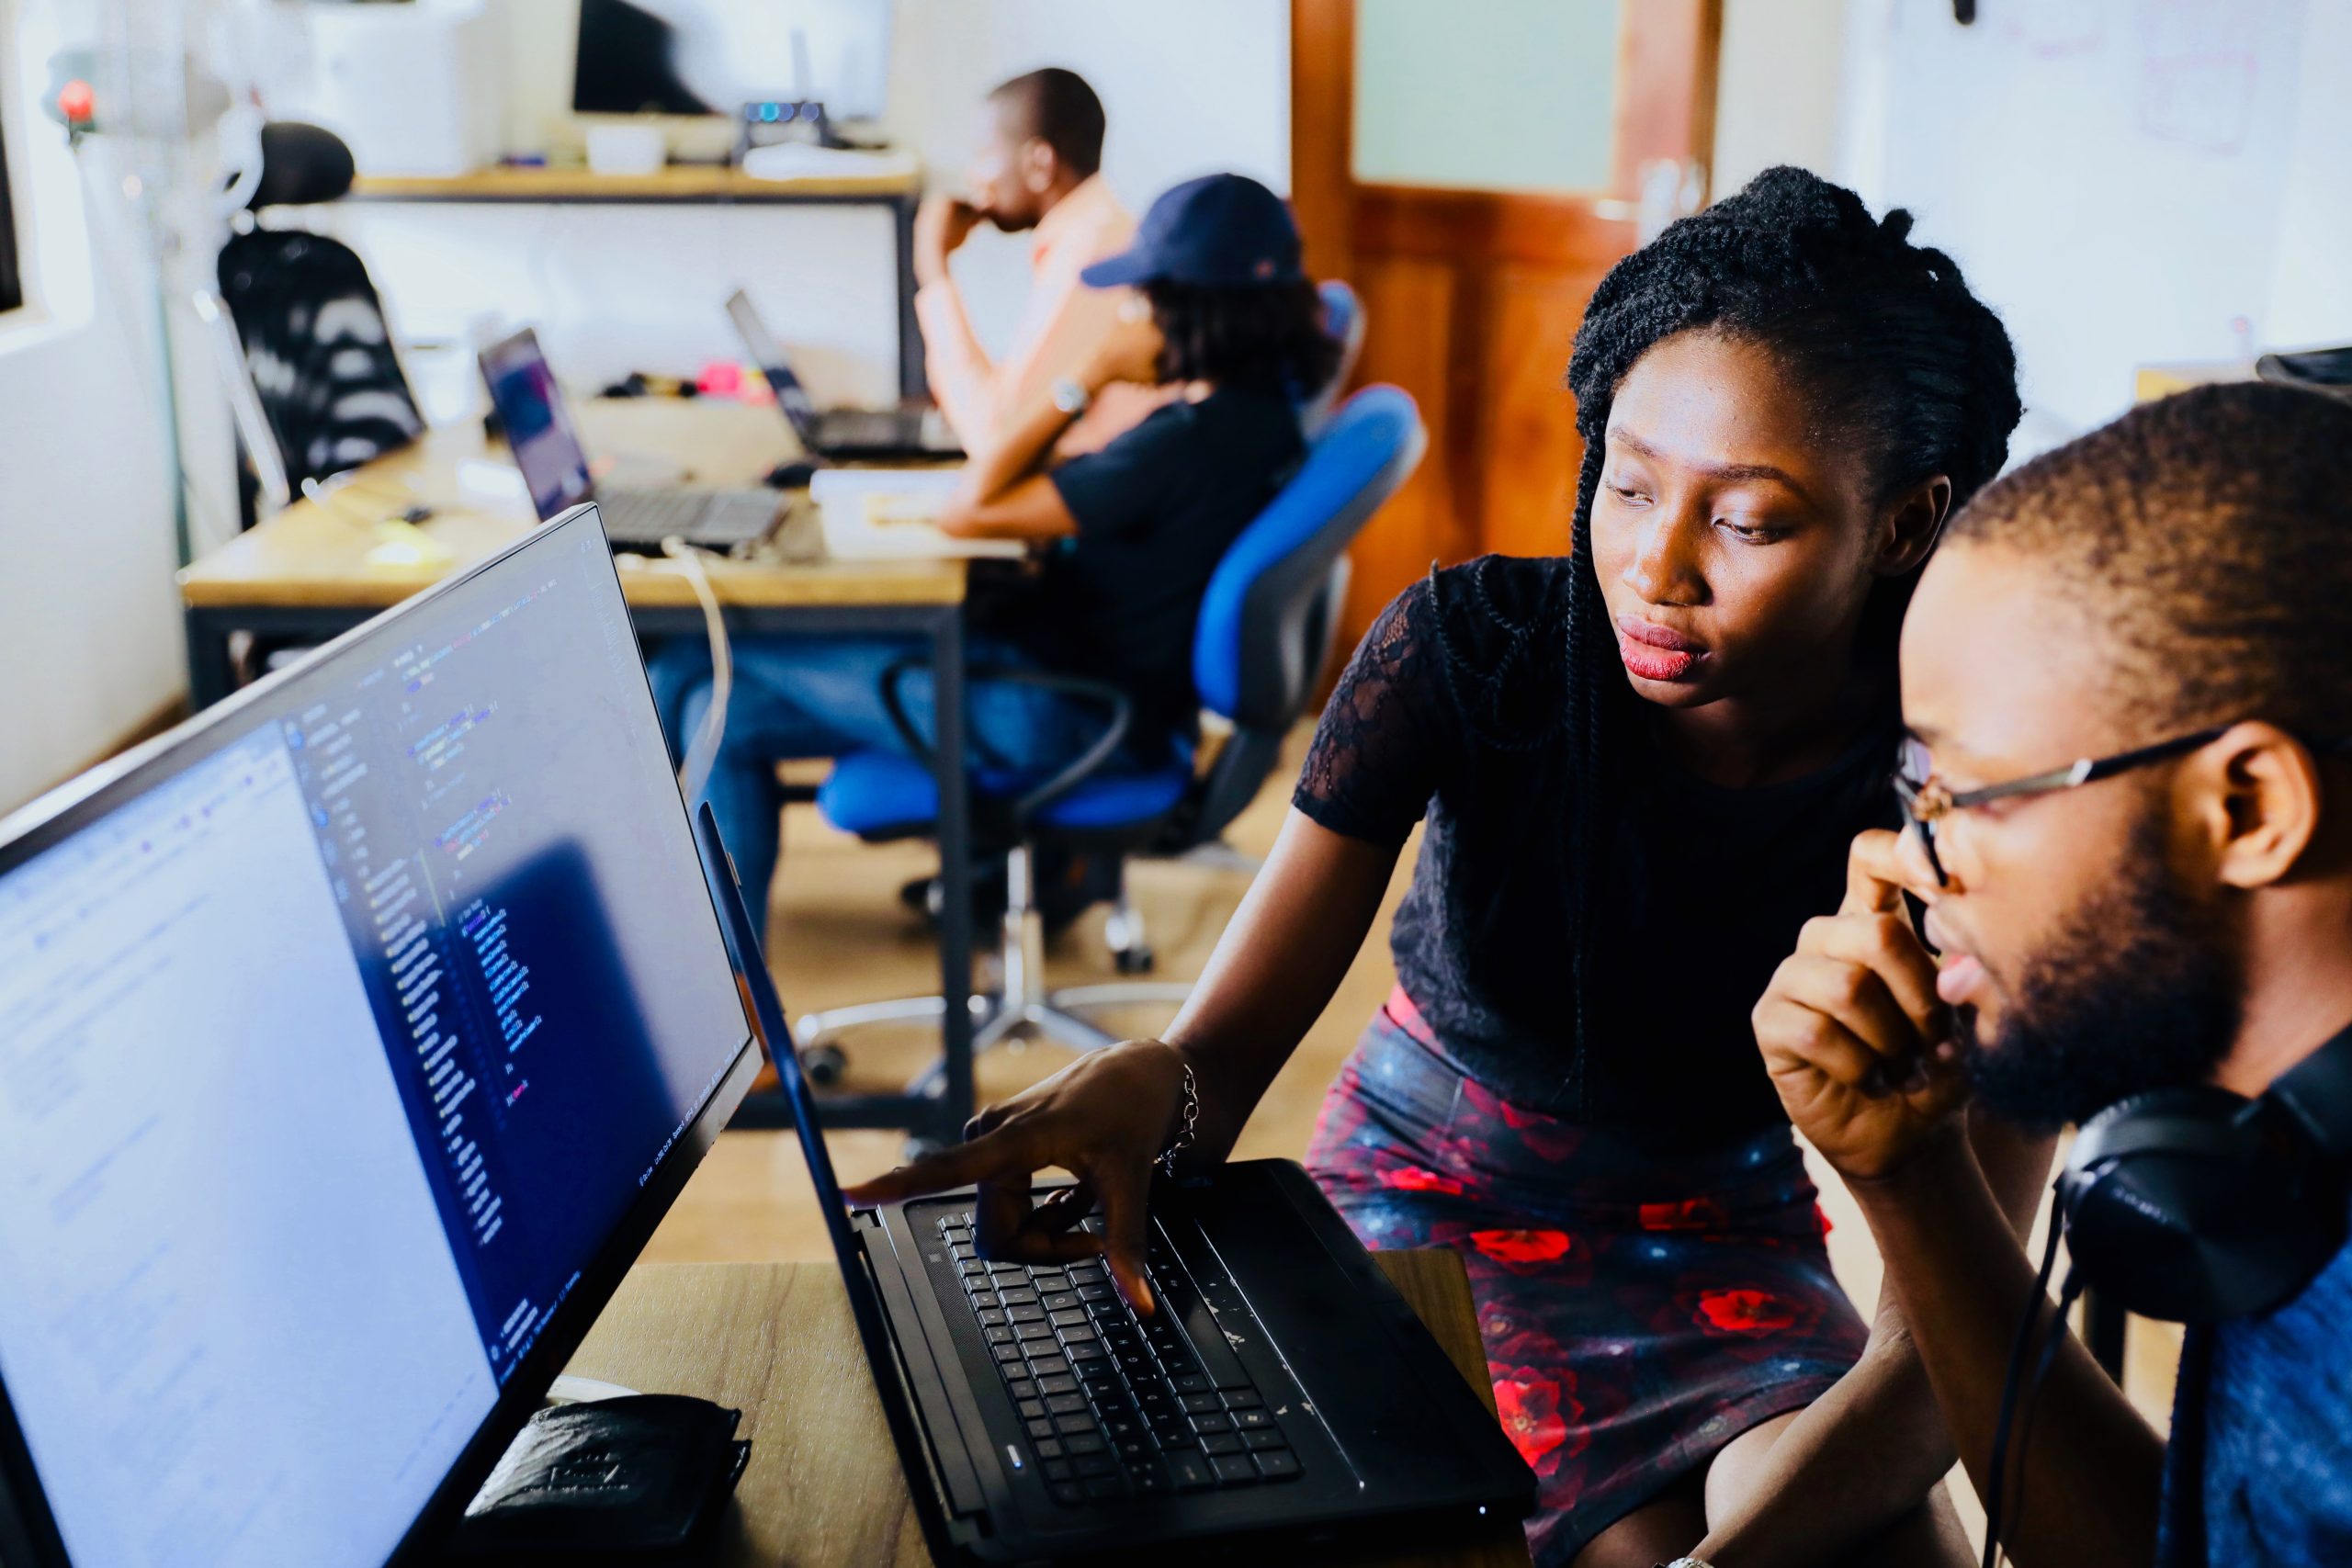 WHY DIGITAL SKILLS ARE IMPORTANT FOR YOUTH